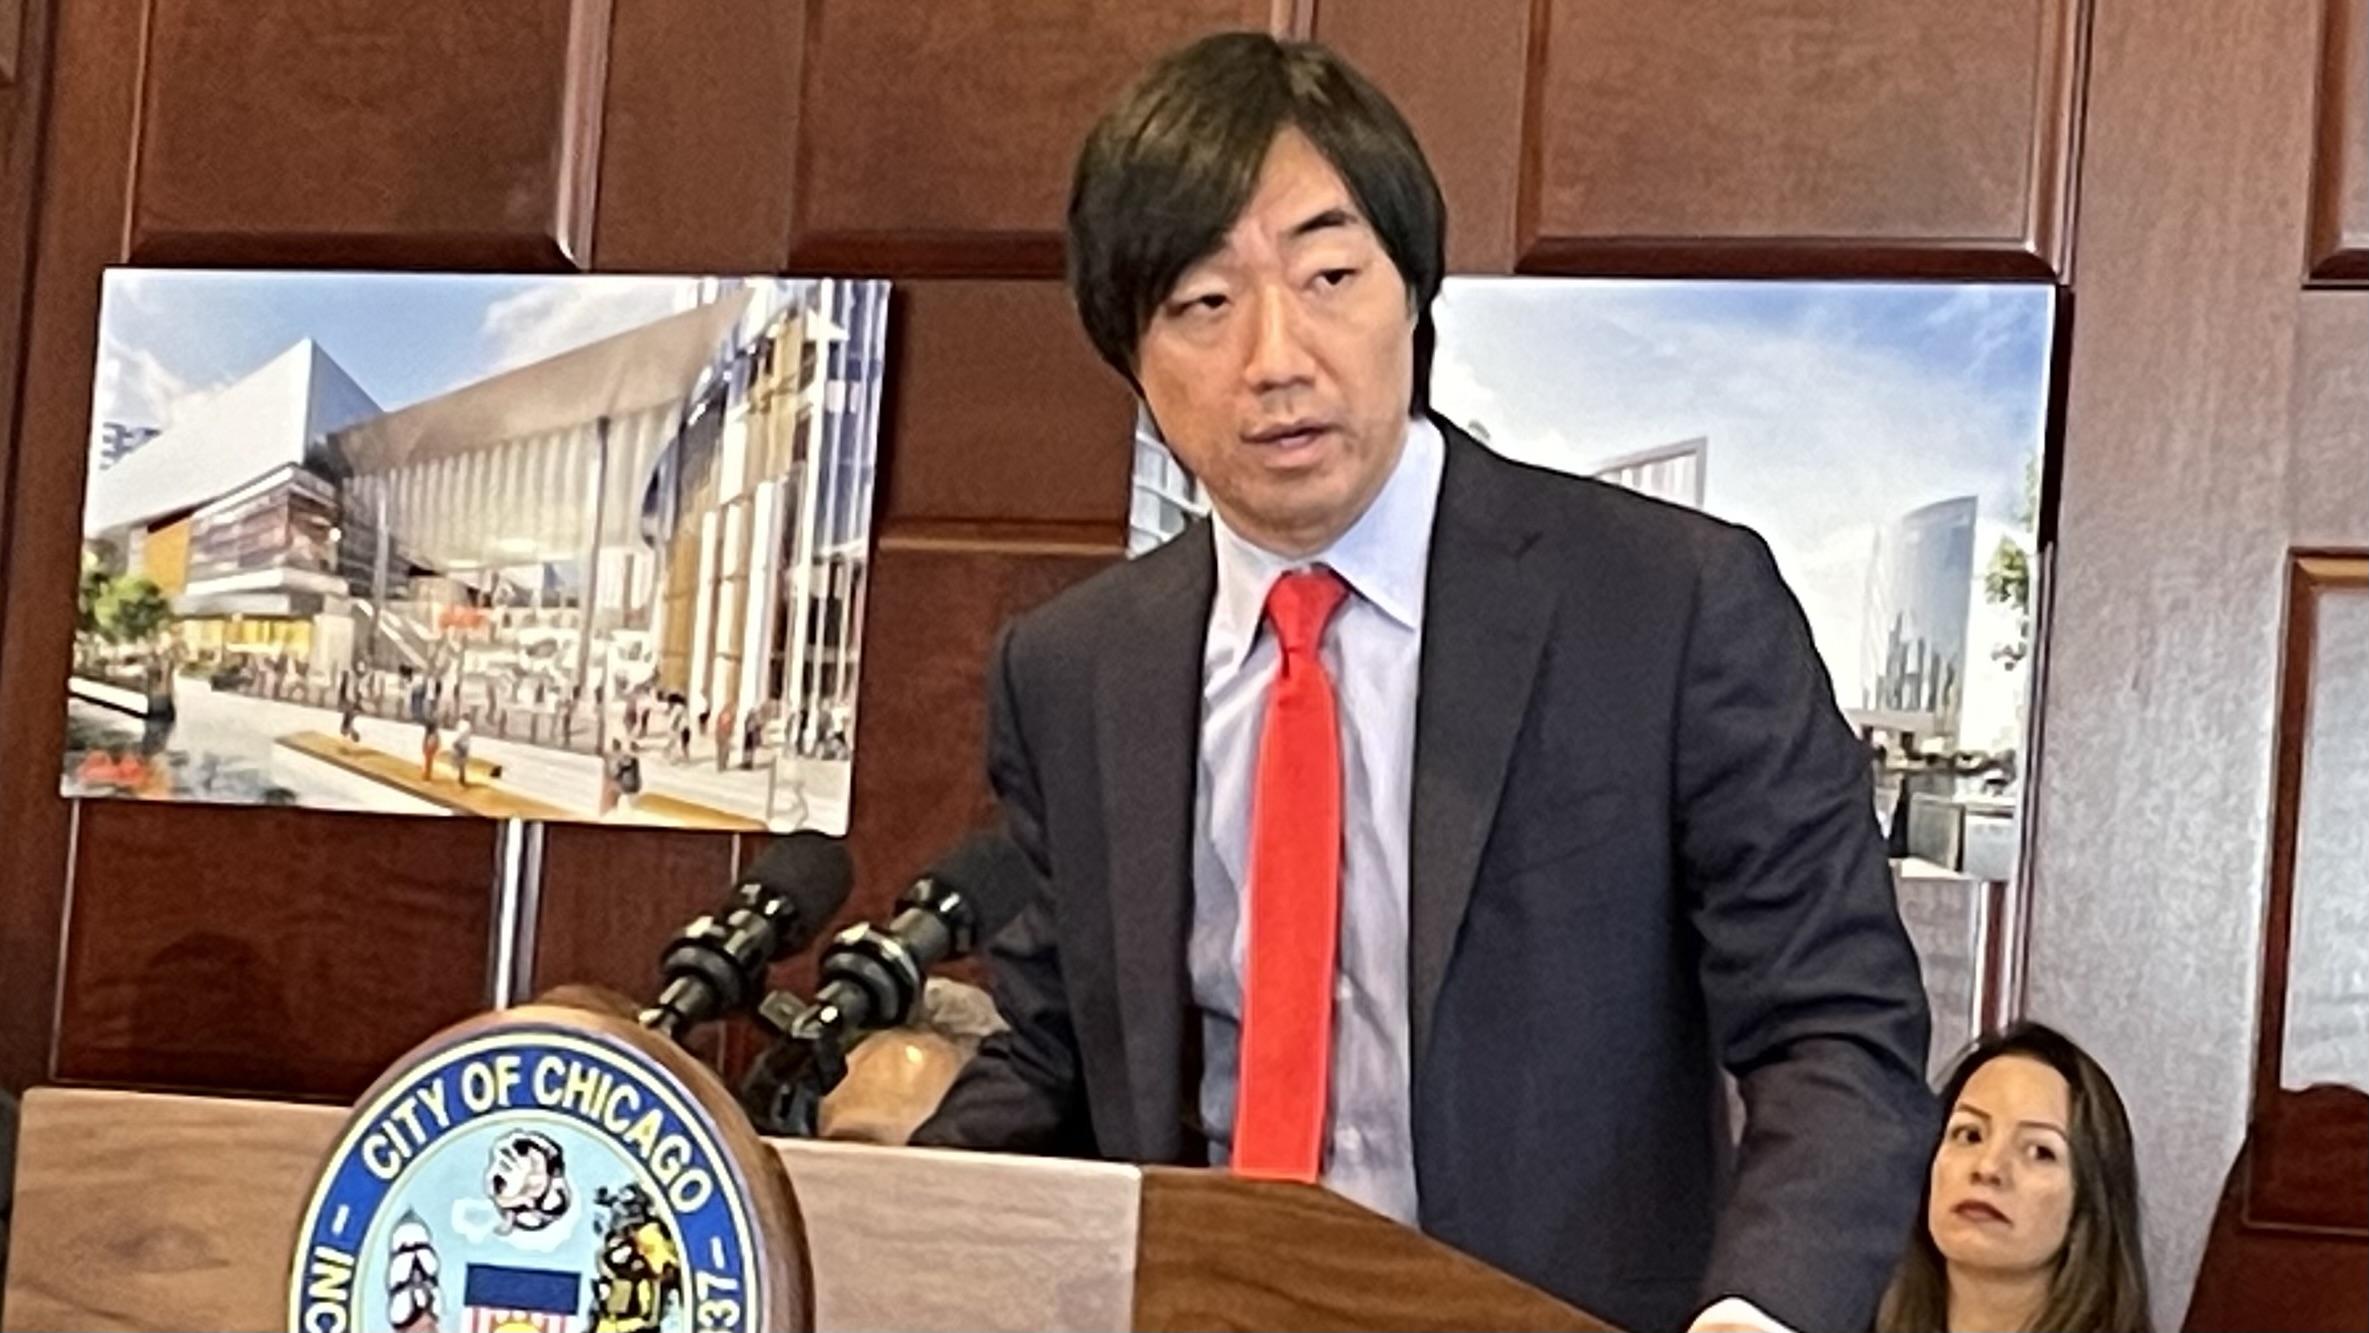 Soo Kim, the chairman of Rhode Island-based Bally’s, addresses the crowd at the Mid-America Carpenters Regional Council, where Mayor Lori Lightfoot announced her pick for the Chicago casino. (Heather Cherone/WTTW News)